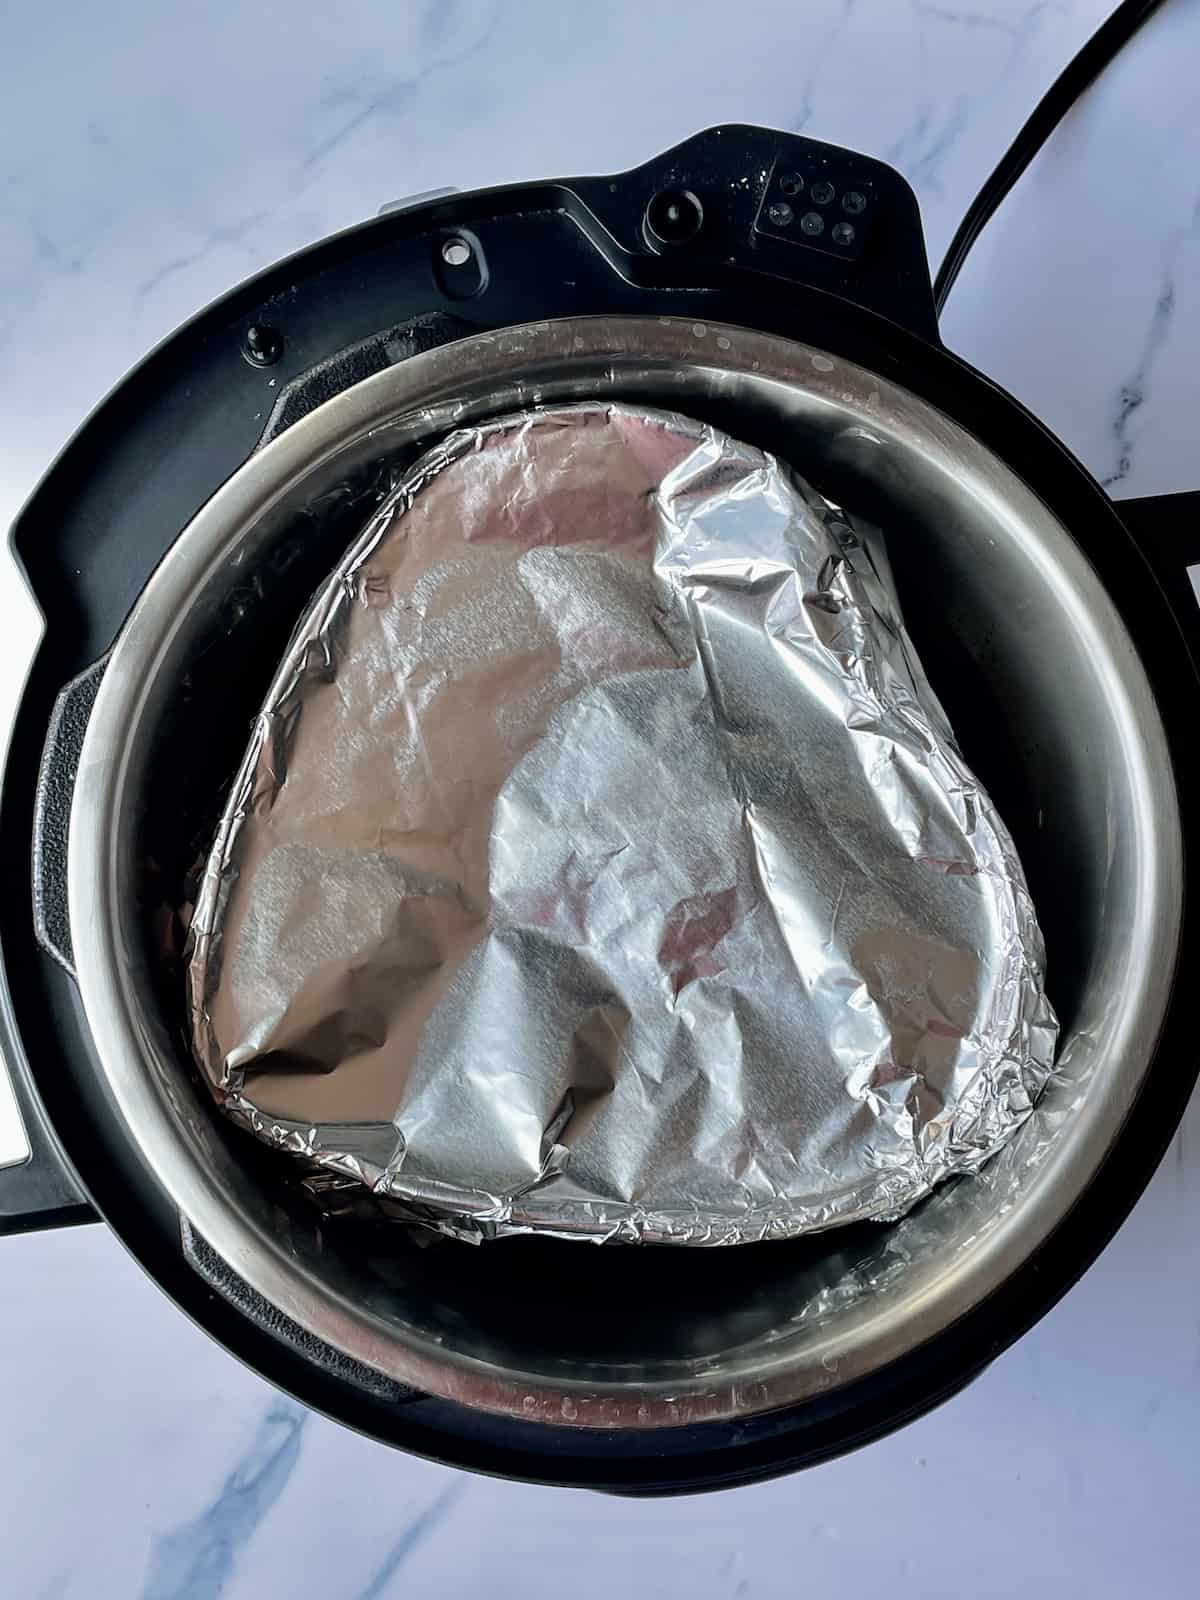 a heart shaped pan wrapped in foil on a trivet in the instant pot